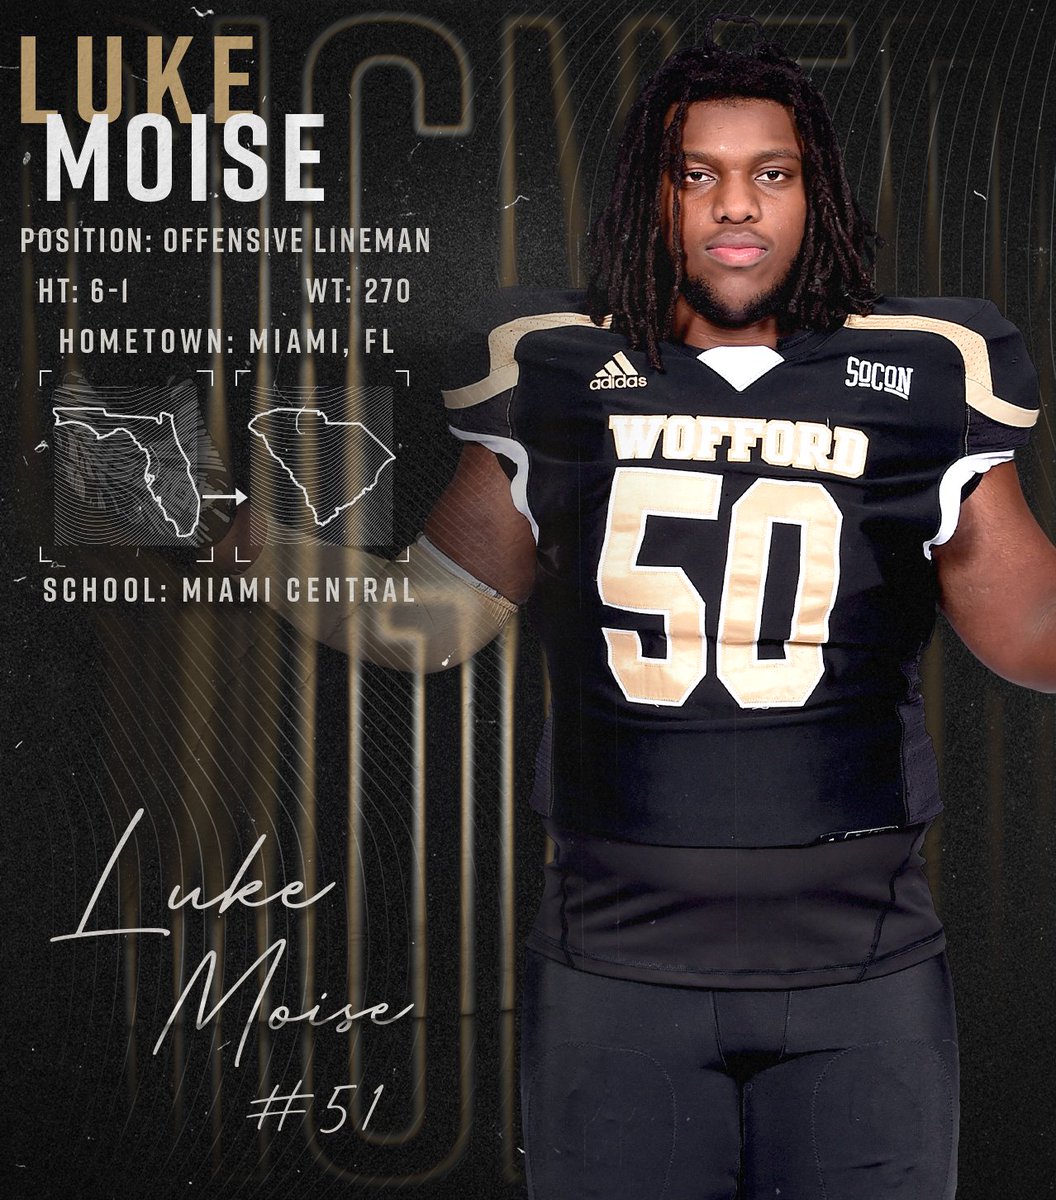 A big welcome to a big guy on the offensive line - Luke Moise from Miami, Florida!